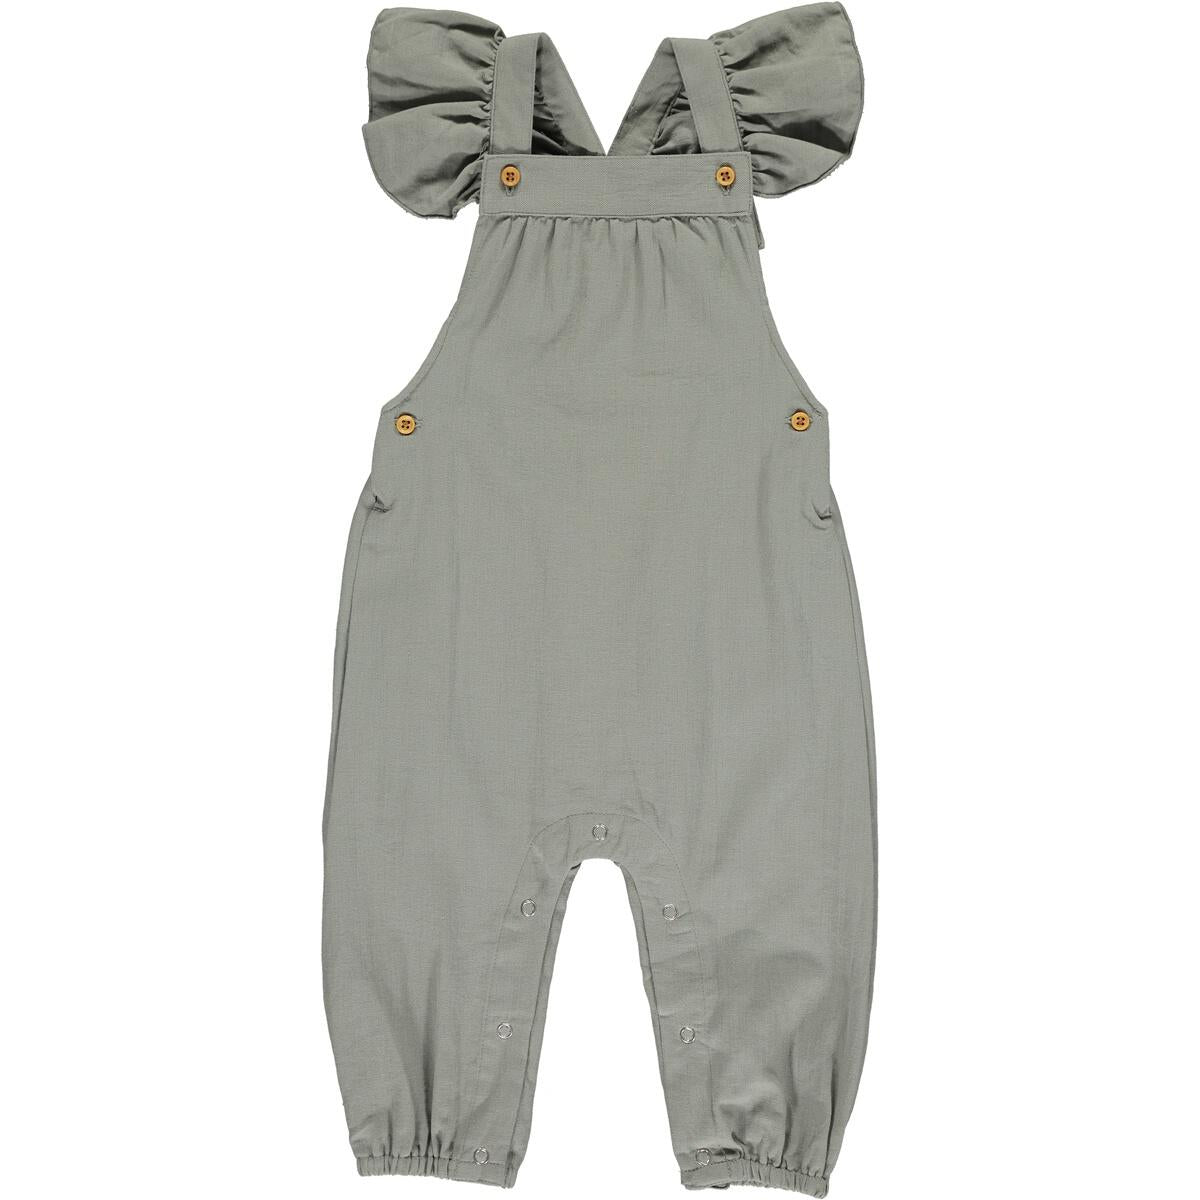 Eloise Ruffle Overall in Grey